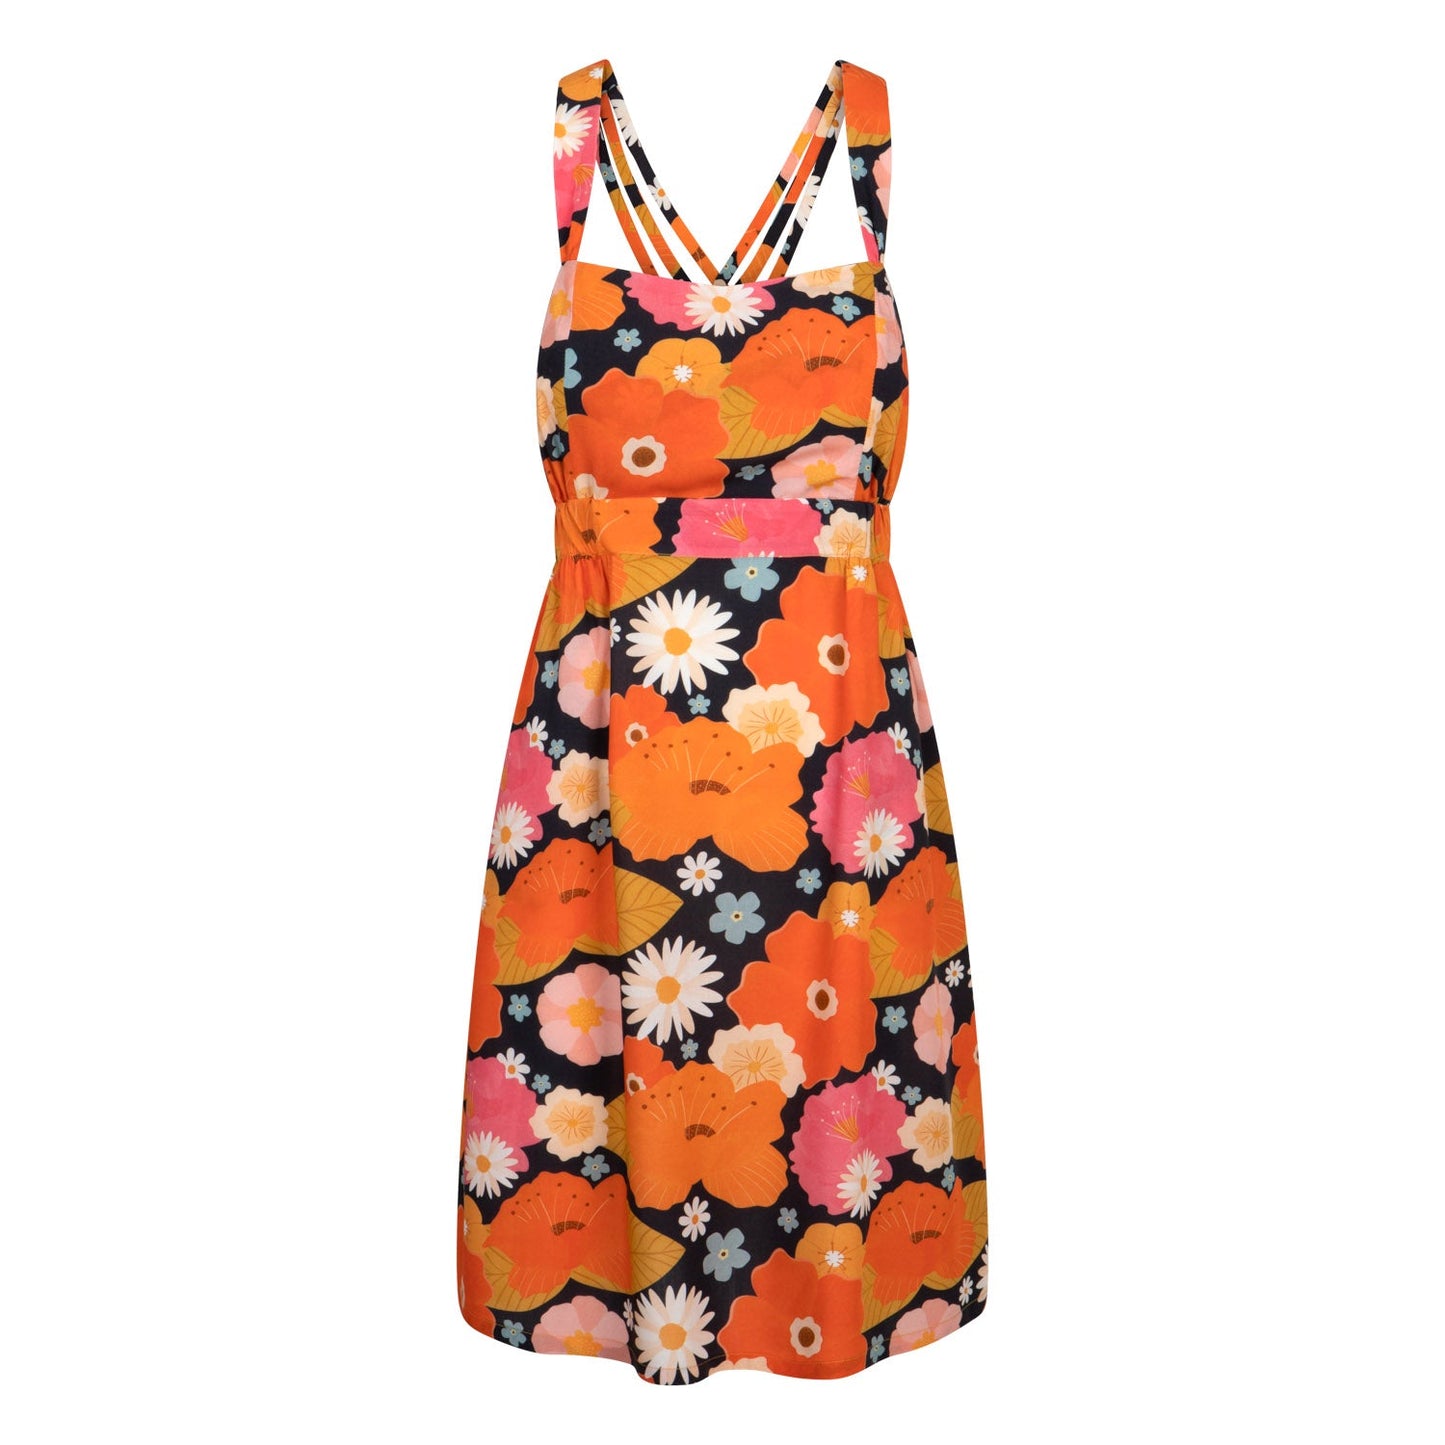 Dress Sweet Sixties "Picnic with flowers"